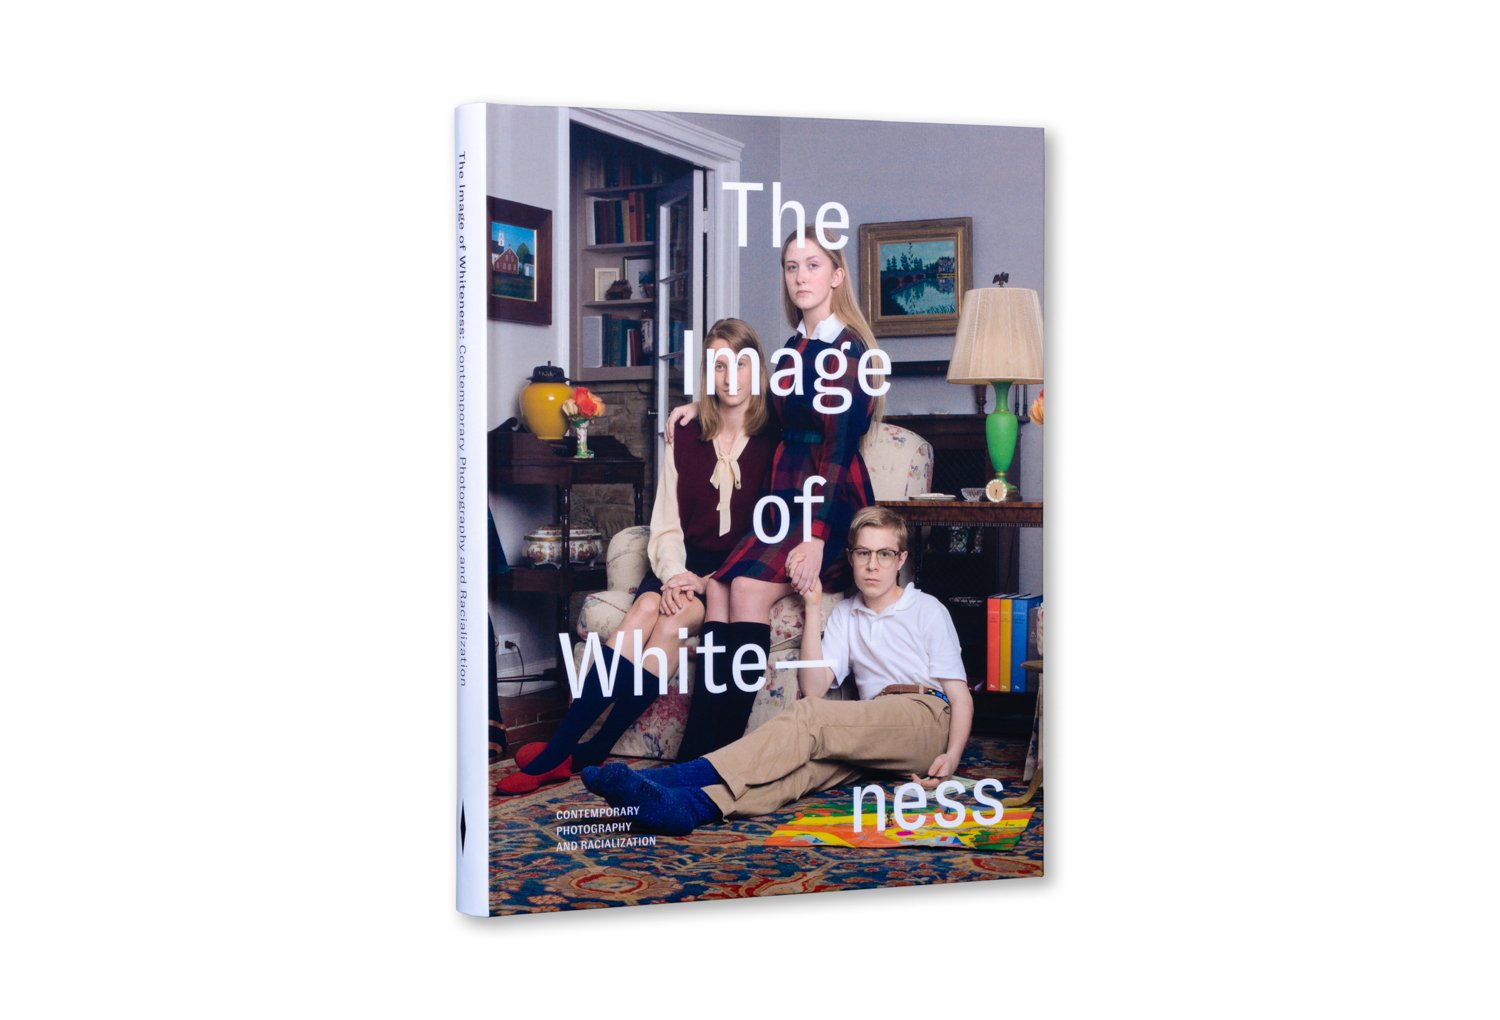 The Image of Whiteness